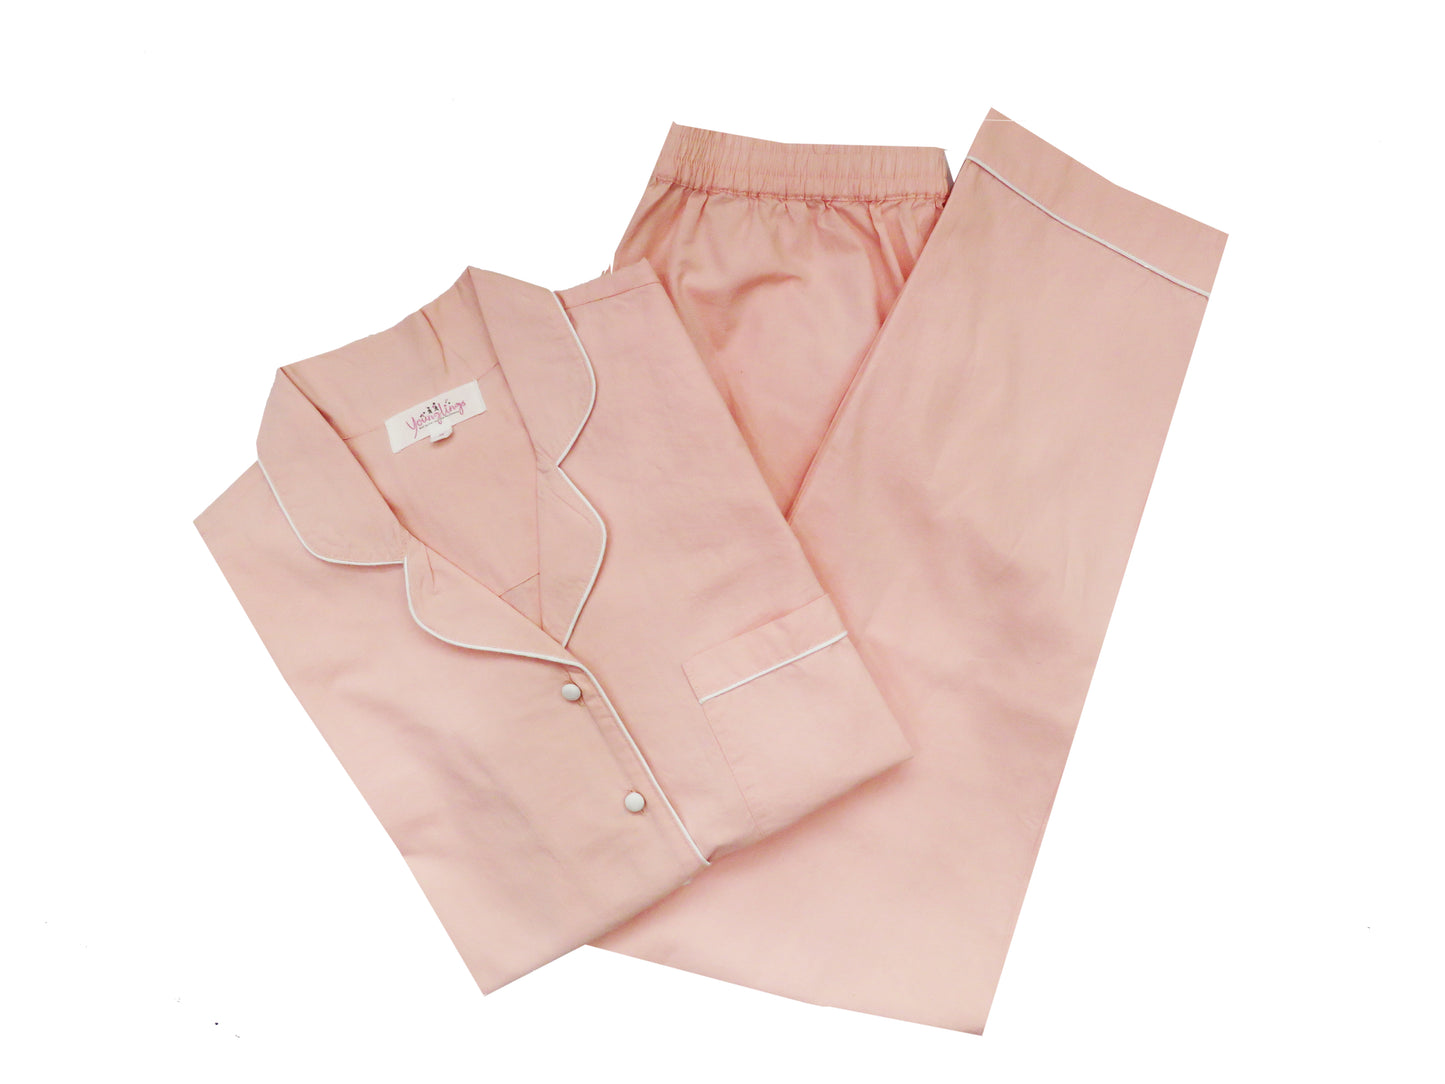 Full Sleeves Pretty In Peach Nightsuit Set With White Buttons And Piping